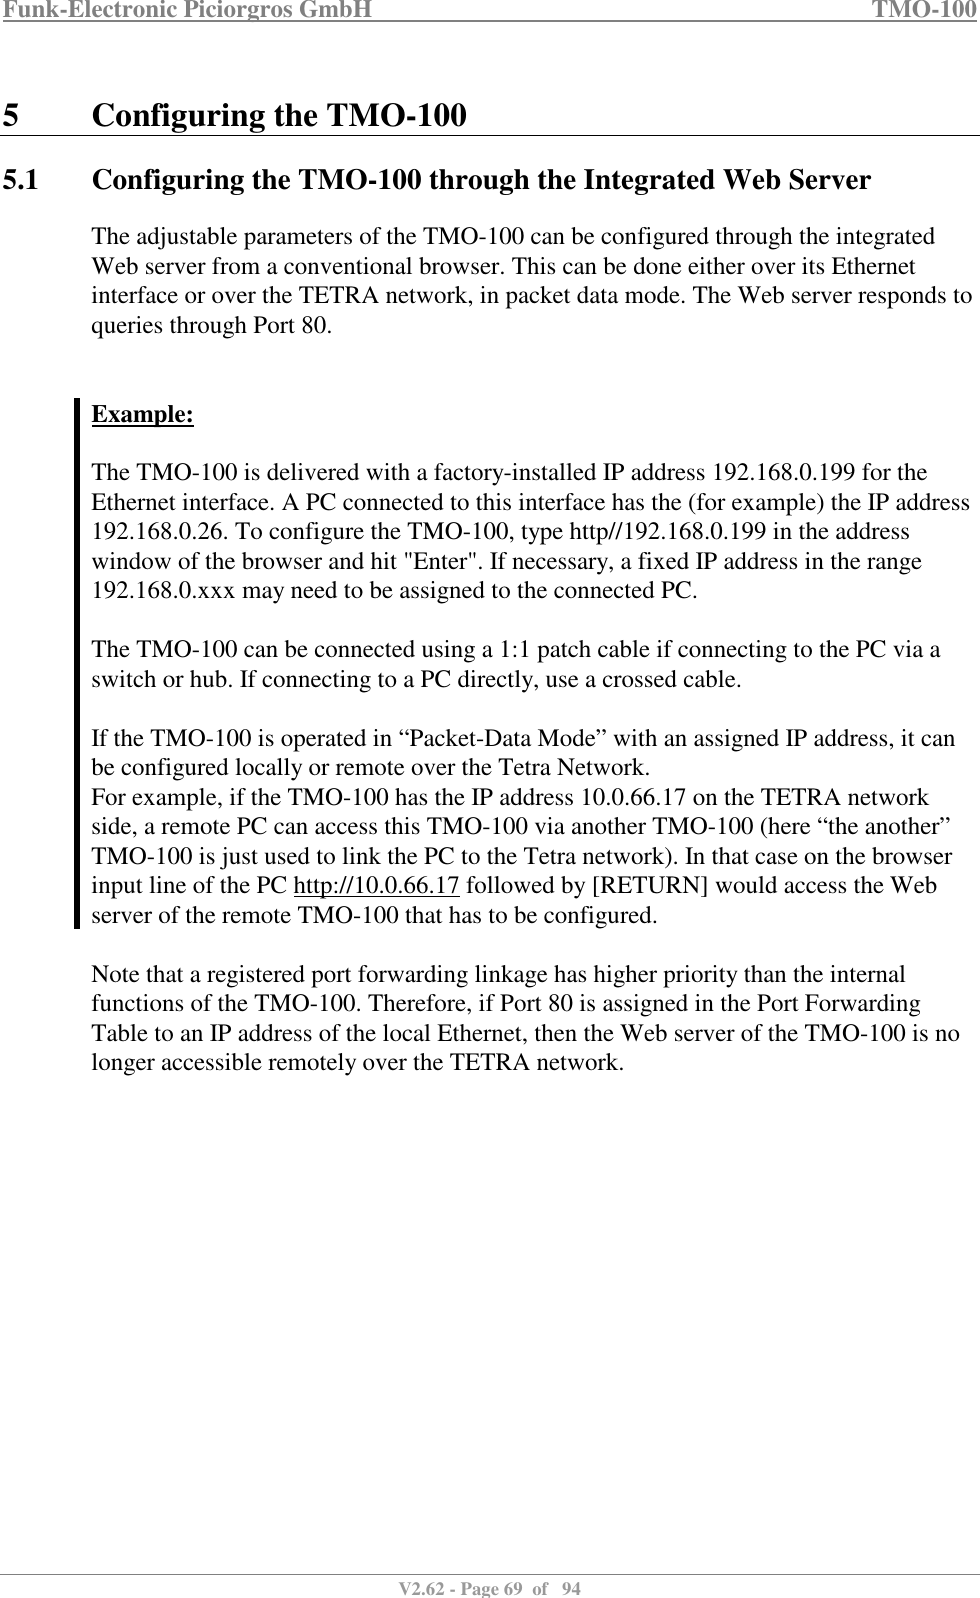 Funk-Electronic Piciorgros GmbH   TMO-100   V2.62 - Page 69  of   94   5 Configuring the TMO-100 5.1 Configuring the TMO-100 through the Integrated Web Server The adjustable parameters of the TMO-100 can be configured through the integrated Web server from a conventional browser. This can be done either over its Ethernet interface or over the TETRA network, in packet data mode. The Web server responds to queries through Port 80.   Example:  The TMO-100 is delivered with a factory-installed IP address 192.168.0.199 for the Ethernet interface. A PC connected to this interface has the (for example) the IP address 192.168.0.26. To configure the TMO-100, type http//192.168.0.199 in the address window of the browser and hit &quot;Enter&quot;. If necessary, a fixed IP address in the range 192.168.0.xxx may need to be assigned to the connected PC.  The TMO-100 can be connected using a 1:1 patch cable if connecting to the PC via a switch or hub. If connecting to a PC directly, use a crossed cable.   If the TMO-100 is operated in “Packet-Data Mode” with an assigned IP address, it can be configured locally or remote over the Tetra Network.  For example, if the TMO-100 has the IP address 10.0.66.17 on the TETRA network side, a remote PC can access this TMO-100 via another TMO-100 (here “the another” TMO-100 is just used to link the PC to the Tetra network). In that case on the browser input line of the PC http://10.0.66.17 followed by [RETURN] would access the Web server of the remote TMO-100 that has to be configured.    Note that a registered port forwarding linkage has higher priority than the internal functions of the TMO-100. Therefore, if Port 80 is assigned in the Port Forwarding Table to an IP address of the local Ethernet, then the Web server of the TMO-100 is no longer accessible remotely over the TETRA network.  